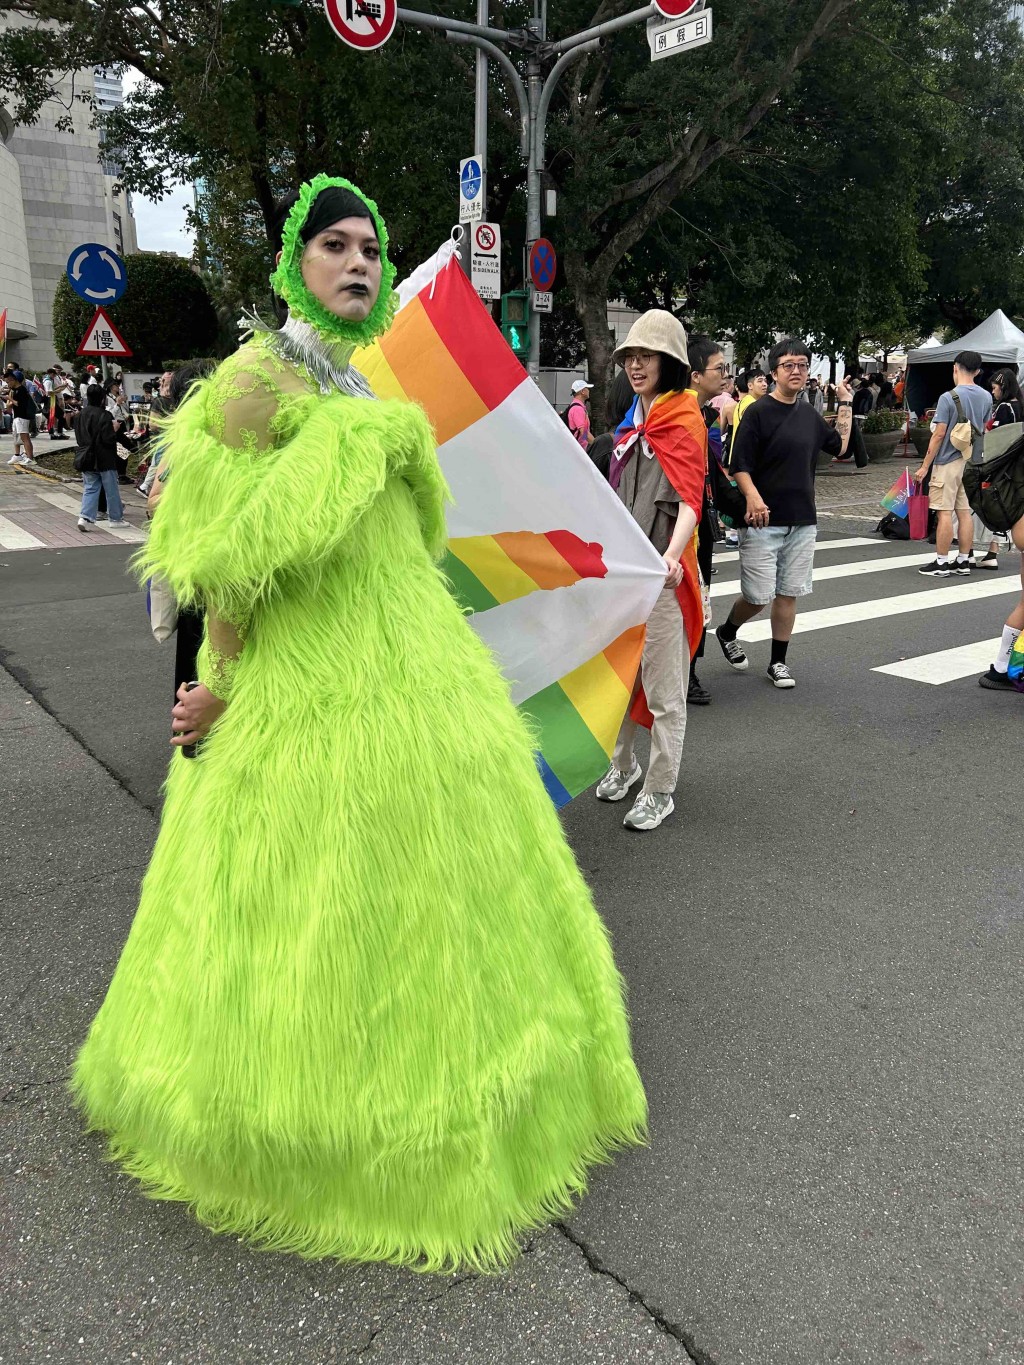 Taiwan hosts East Asia’s largest LGBTQ+ pride parade